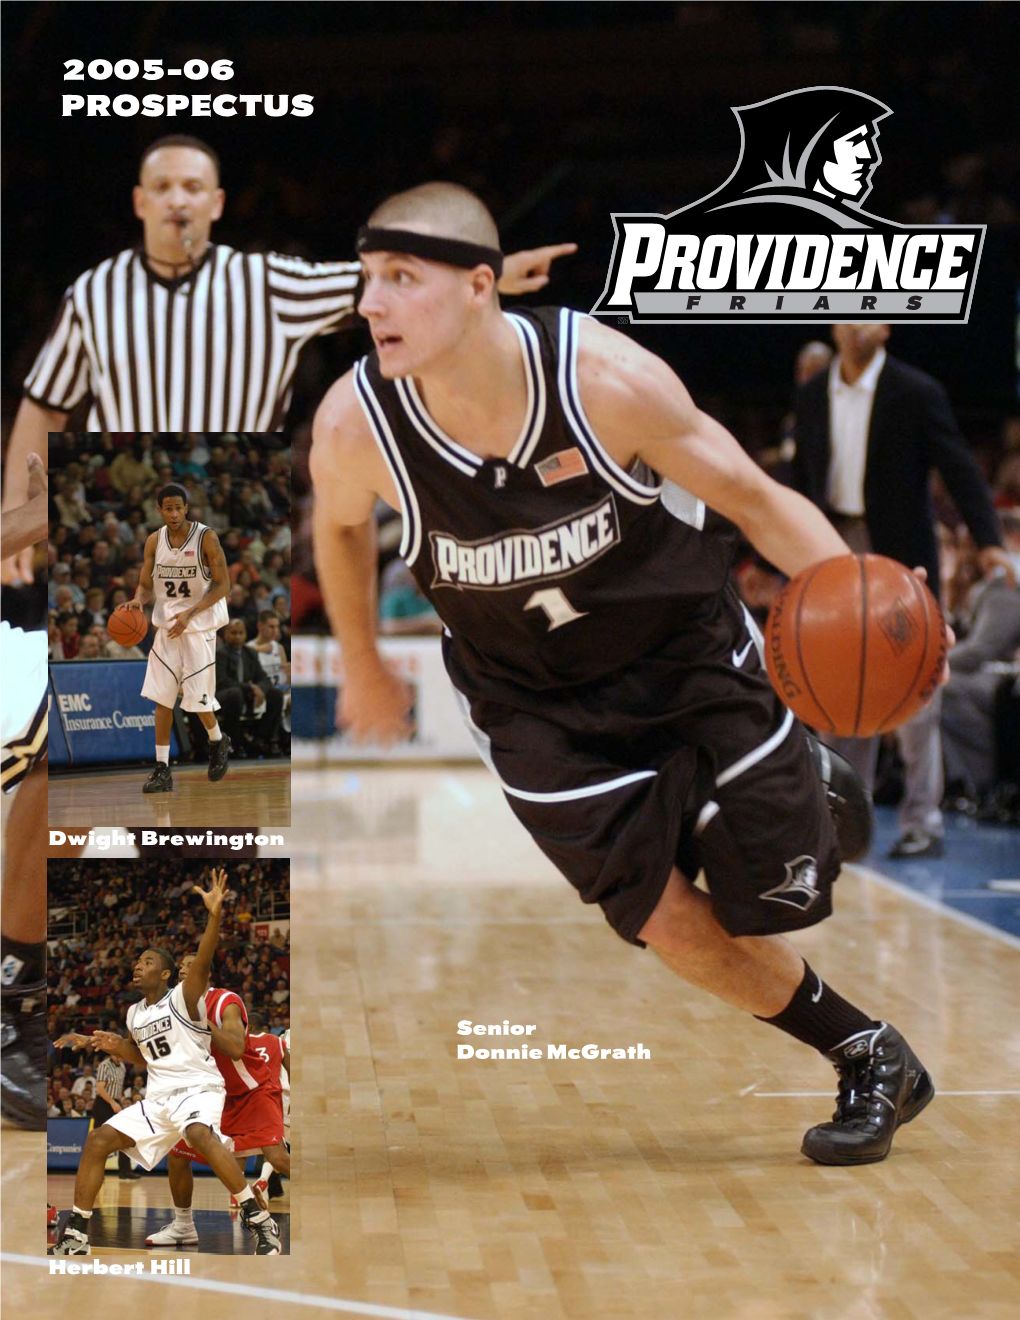 2005-06 Friar Basketball Quick Facts PROVIDENCE COLLEGE MEN's BASKETBALL PROSPECTUS